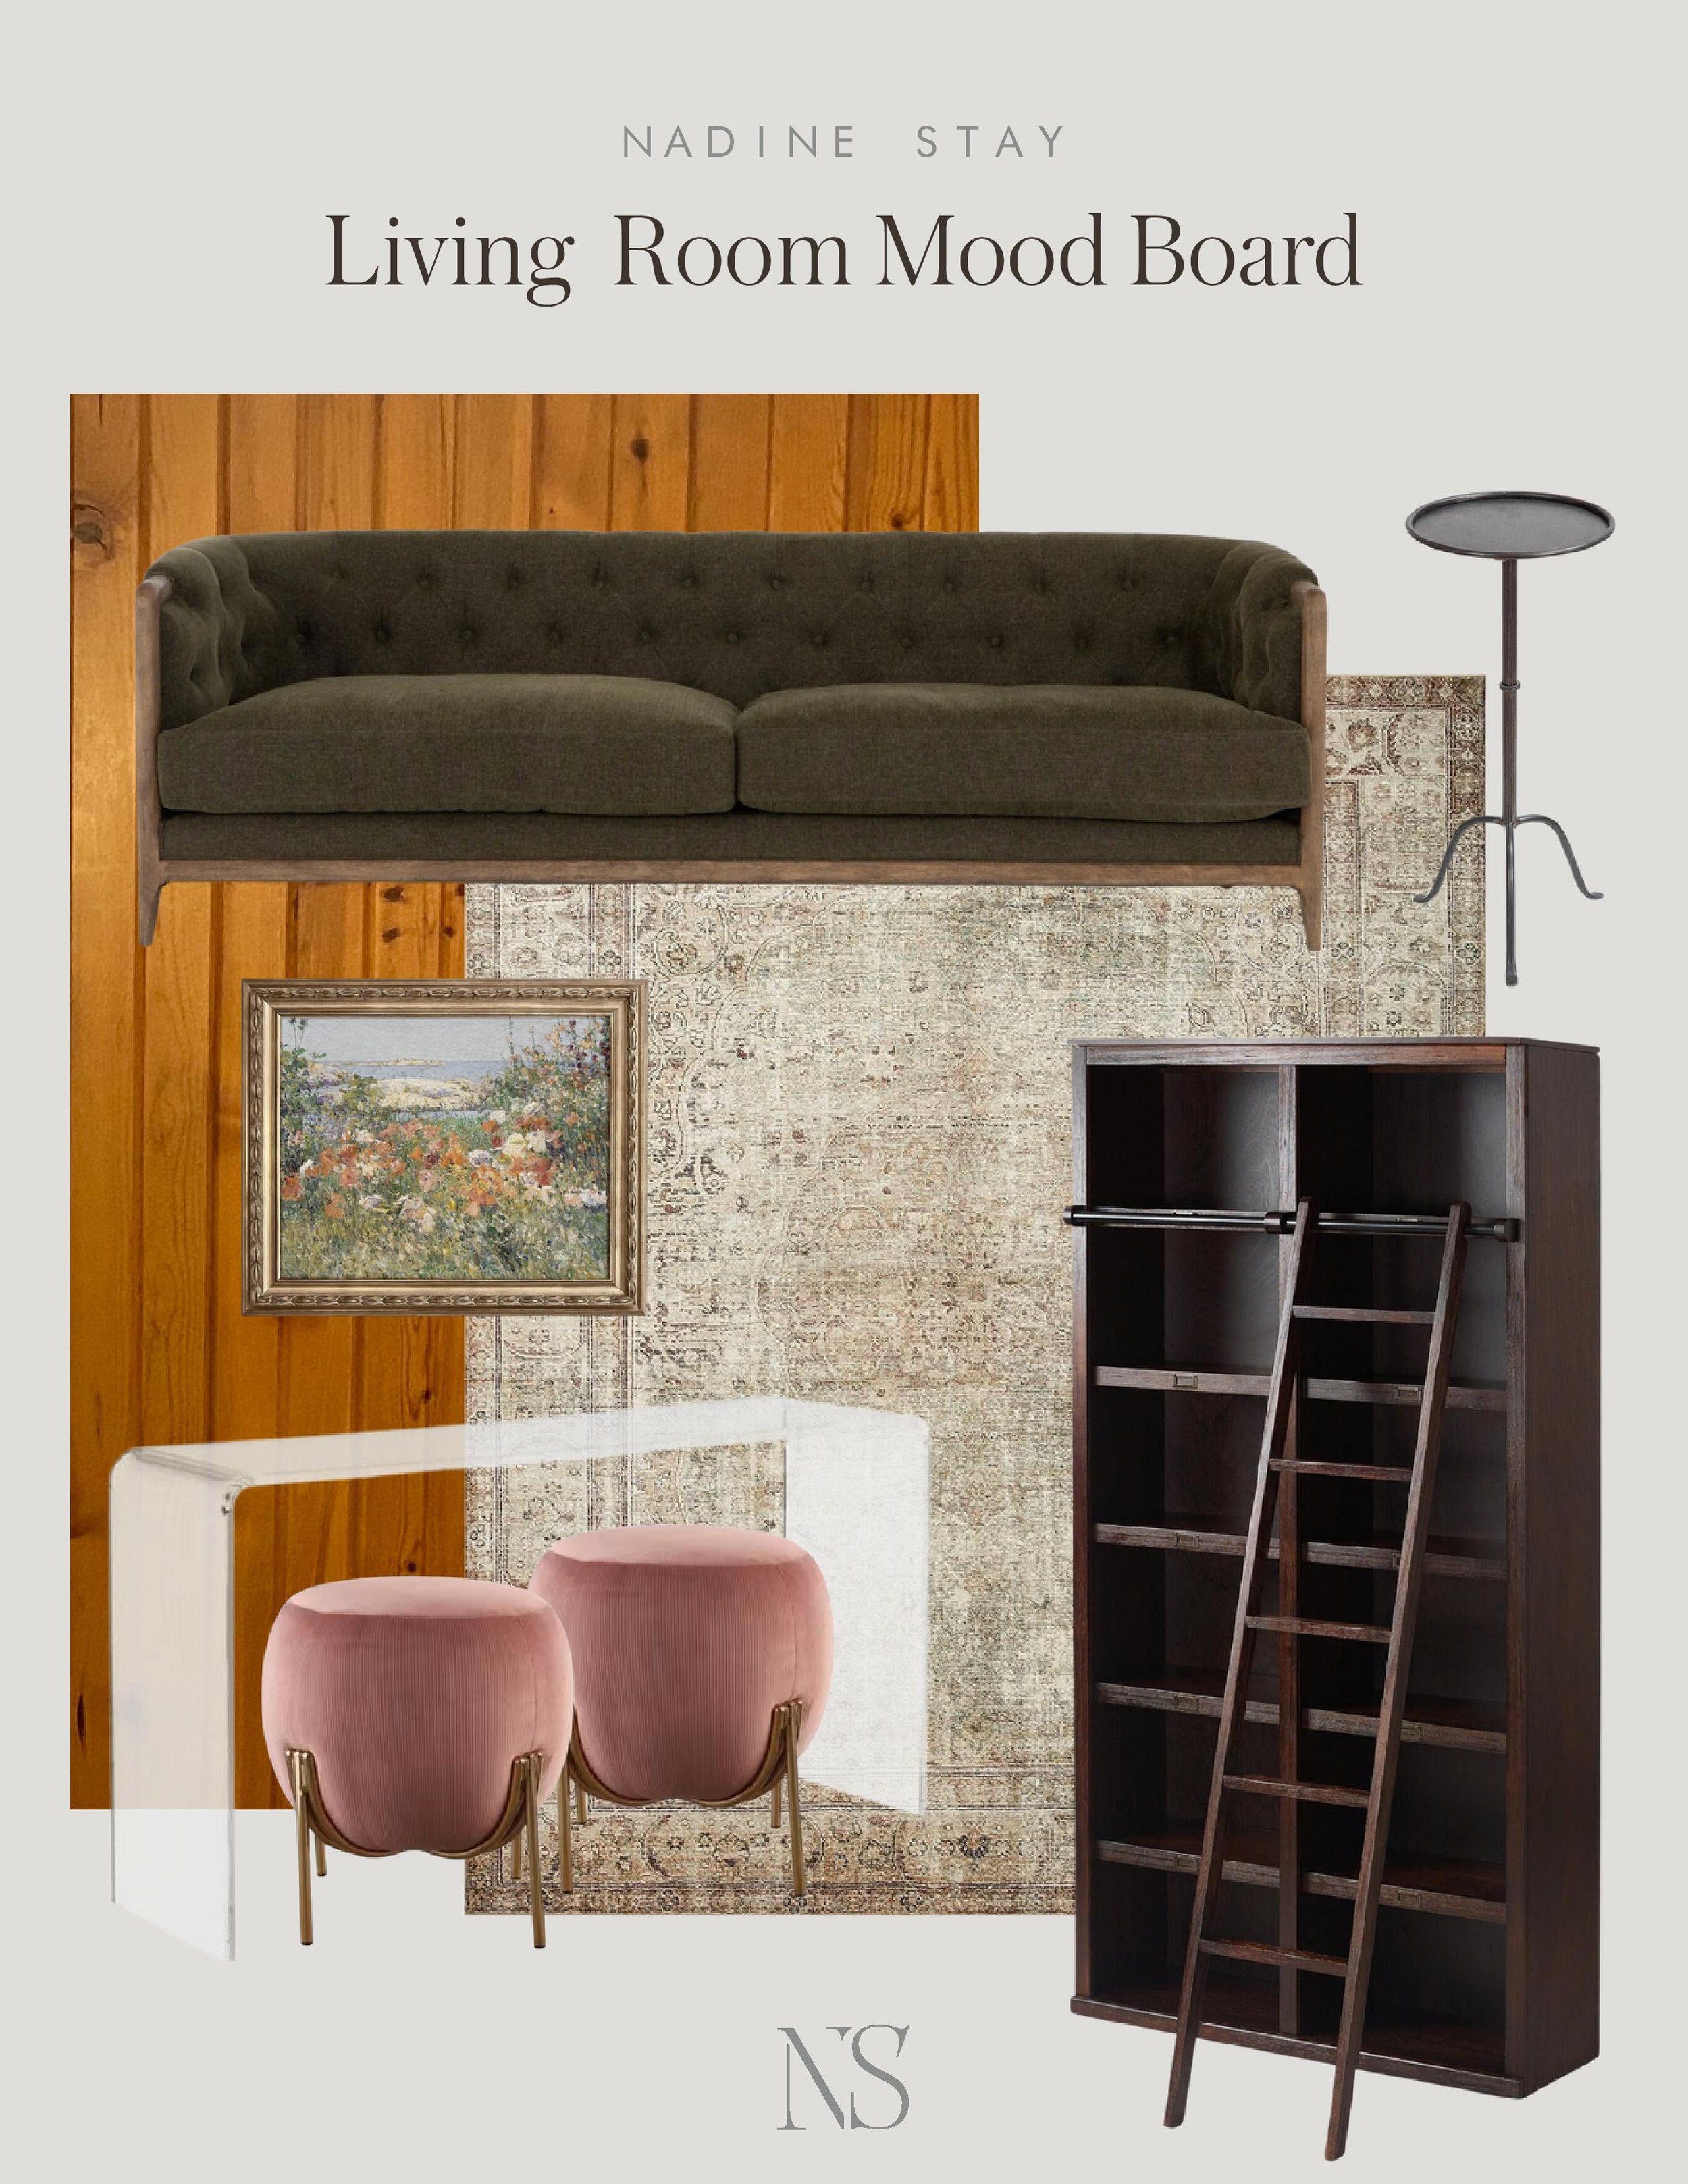 Furniture layout ideas for a tiny living room. Small living room styling ideas. Rustic modern living room design. How to design a small living room. Sage green and dusty pink living room mood board. Rustic, modern living room. Nadine Stay